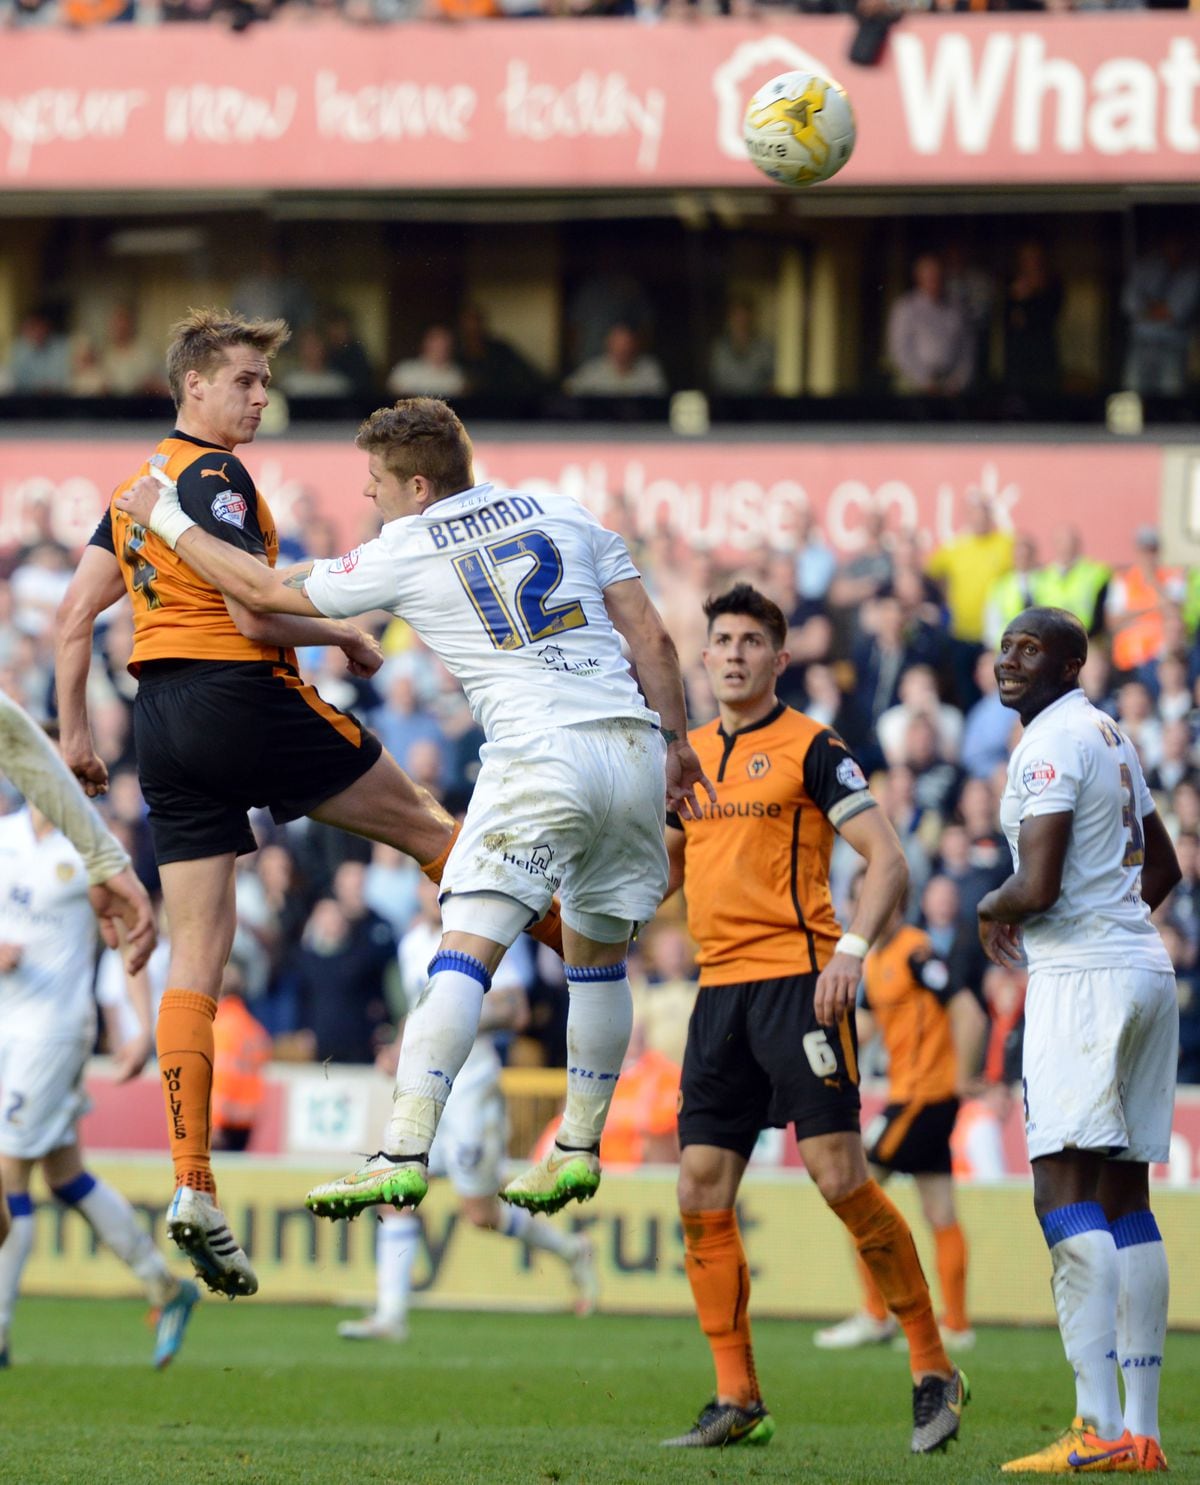 Dave Edwards of Wolverhampton Wanderers scores a goal to make it 4-3.